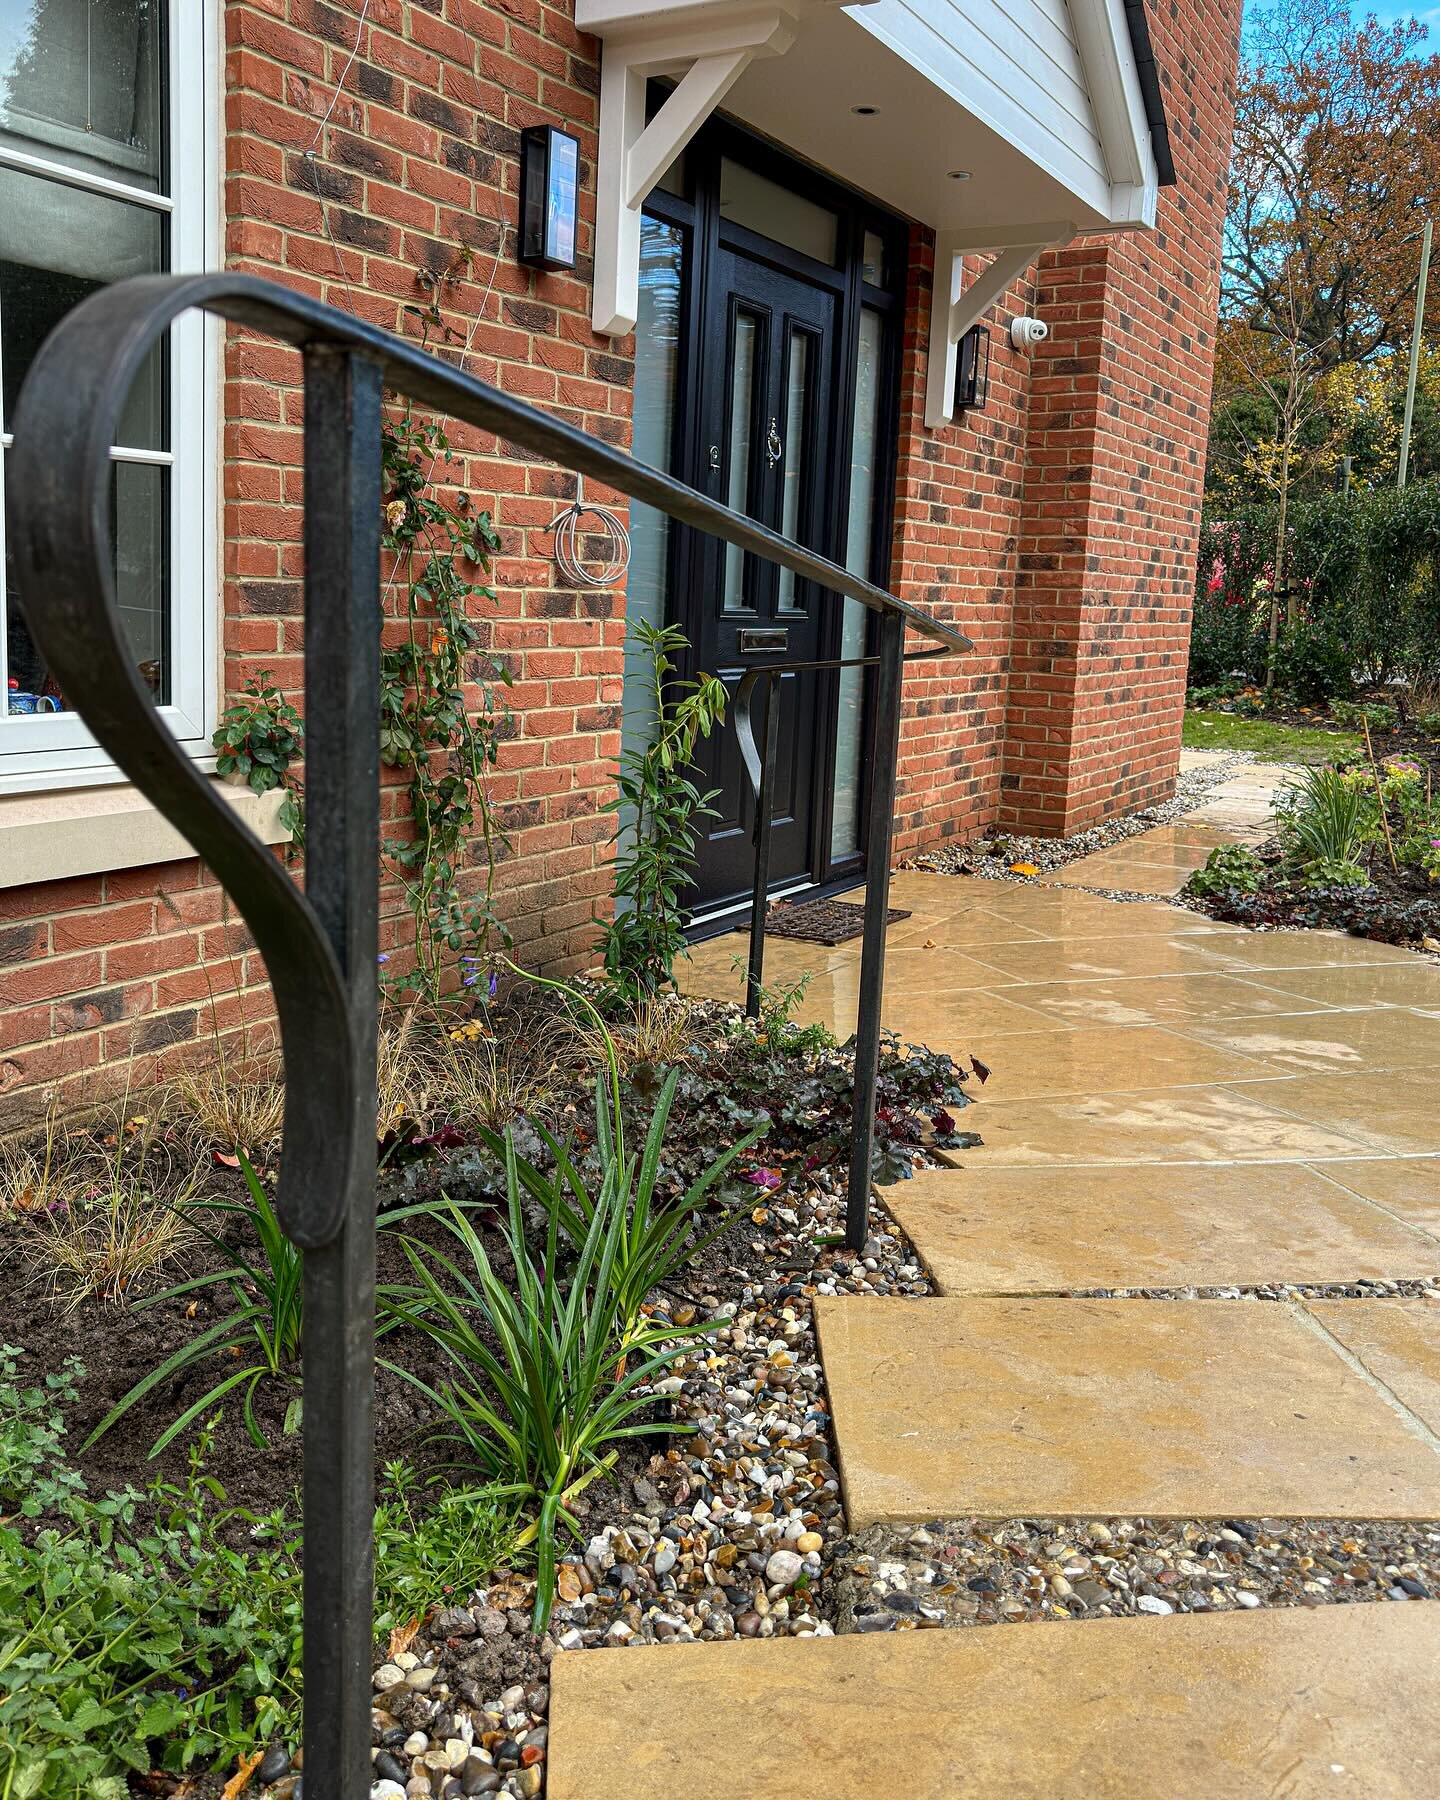 Swan necks and galvanised with a double T-wash to create this dark grey etch finish to tie in with the accents of the house

#metalart #metalaetist #blacksmith #blacksmithing #forged #fireweld #handmade #bespoke #traditional #craftman #craft #form #i